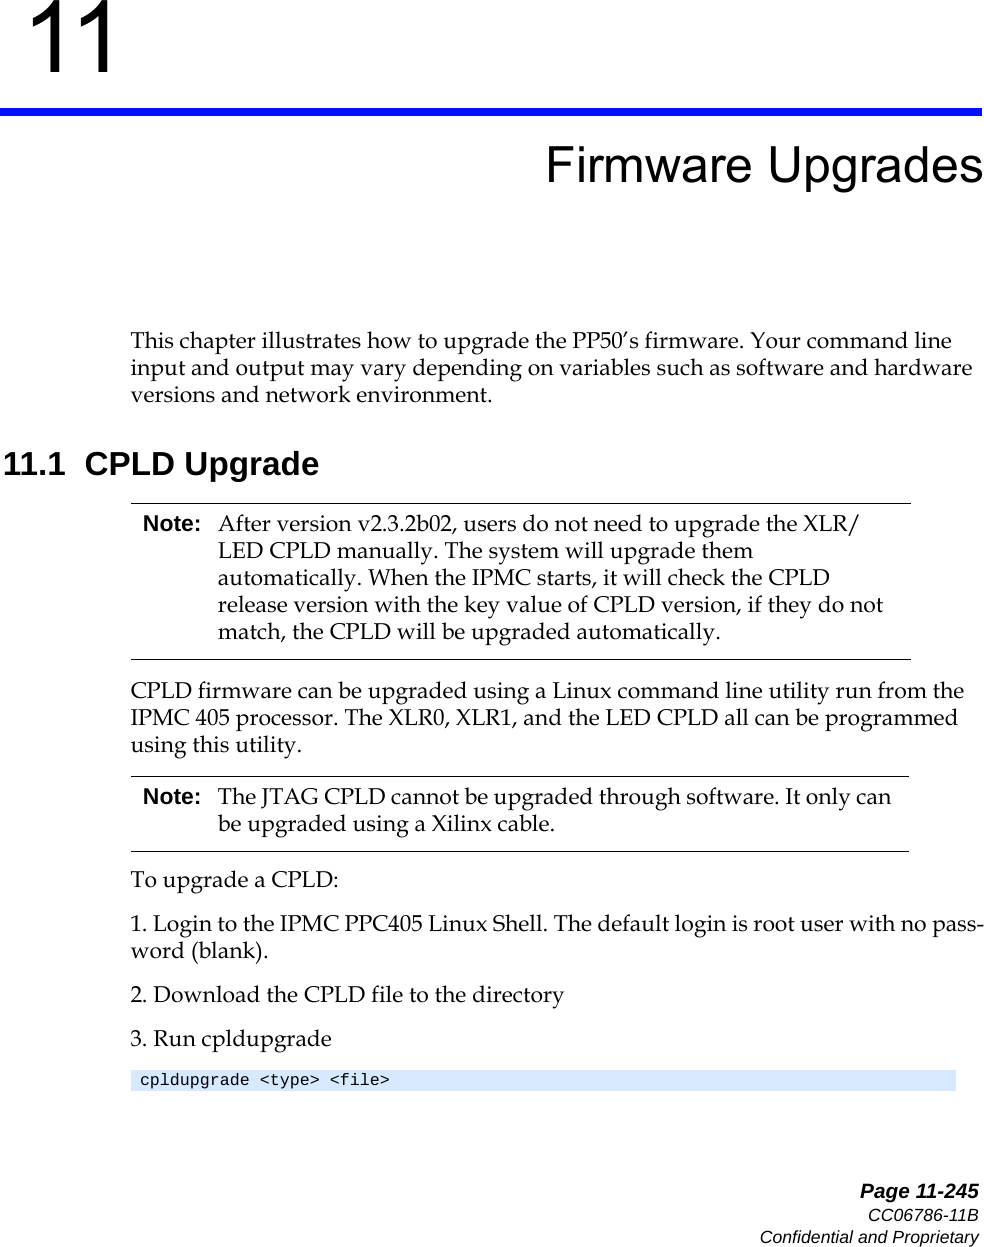   Page 11-245CC06786-11BConfidential and Proprietary11Preliminary11Firmware UpgradesThis chapter illustrates how to upgrade the PP50’s firmware. Your command line input and output may vary depending on variables such as software and hardware versions and network environment.11.1  CPLD UpgradeCPLD firmware can be upgraded using a Linux command line utility run from the IPMC 405 processor. The XLR0, XLR1, and the LED CPLD all can be programmed using this utility.To upgrade a CPLD:1. Login to the IPMC PPC405 Linux Shell. The default login is root user with no pass-word (blank).2. Download the CPLD file to the directory3. Run cpldupgradeNote: After version v2.3.2b02, users do not need to upgrade the XLR/LED CPLD manually. The system will upgrade them automatically. When the IPMC starts, it will check the CPLD release version with the key value of CPLD version, if they do not match, the CPLD will be upgraded automatically. Note: The JTAG CPLD cannot be upgraded through software. It only can be upgraded using a Xilinx cable.cpldupgrade &lt;type&gt; &lt;file&gt;